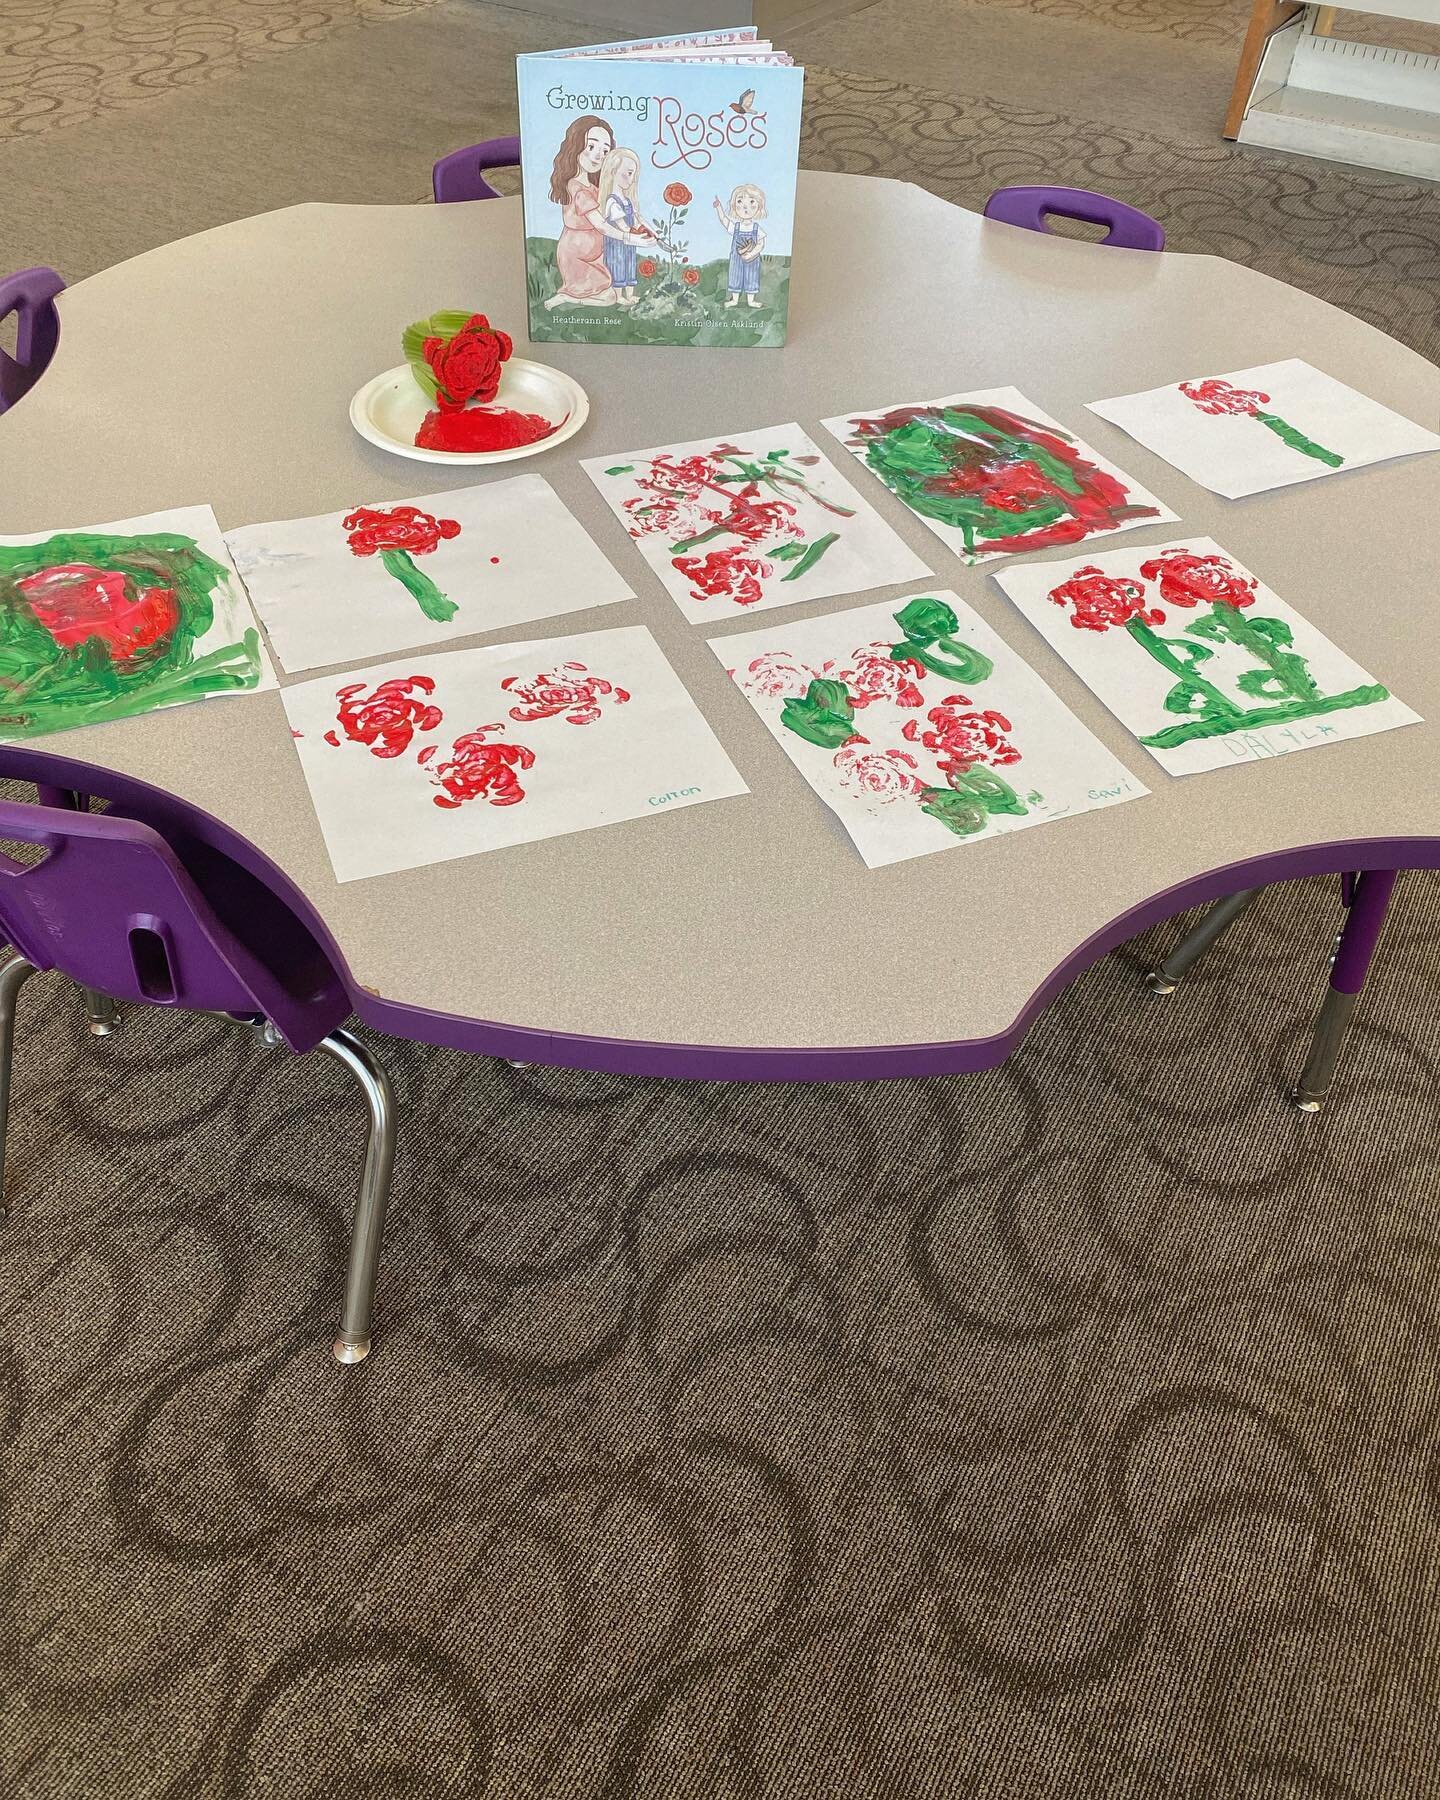 This morning I was invited to read #growingrosesthebook to a group of friends at a local library!
-
@cathersk even organized a rose craft for our friends to enjoy!
-
#therosesistersgardenseries